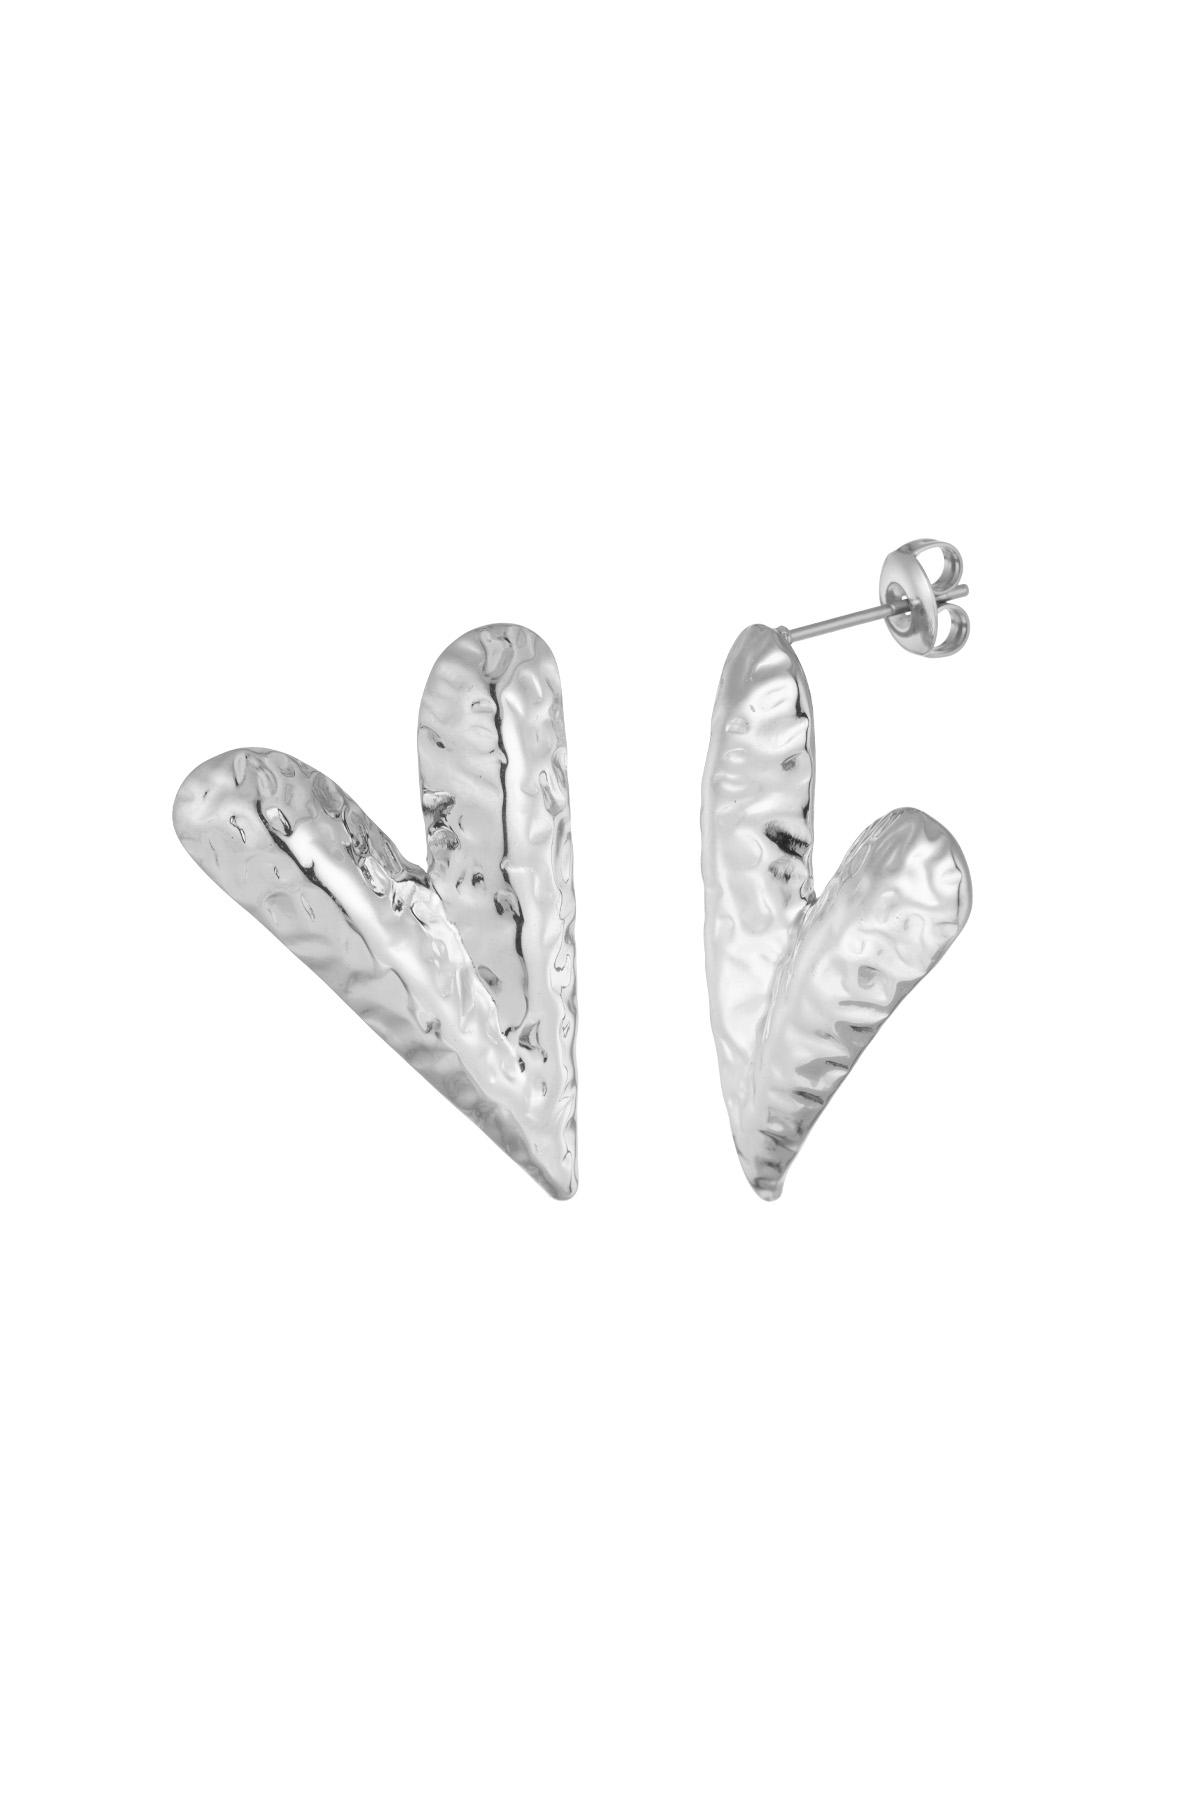 Structured love earrings - silver  h5 